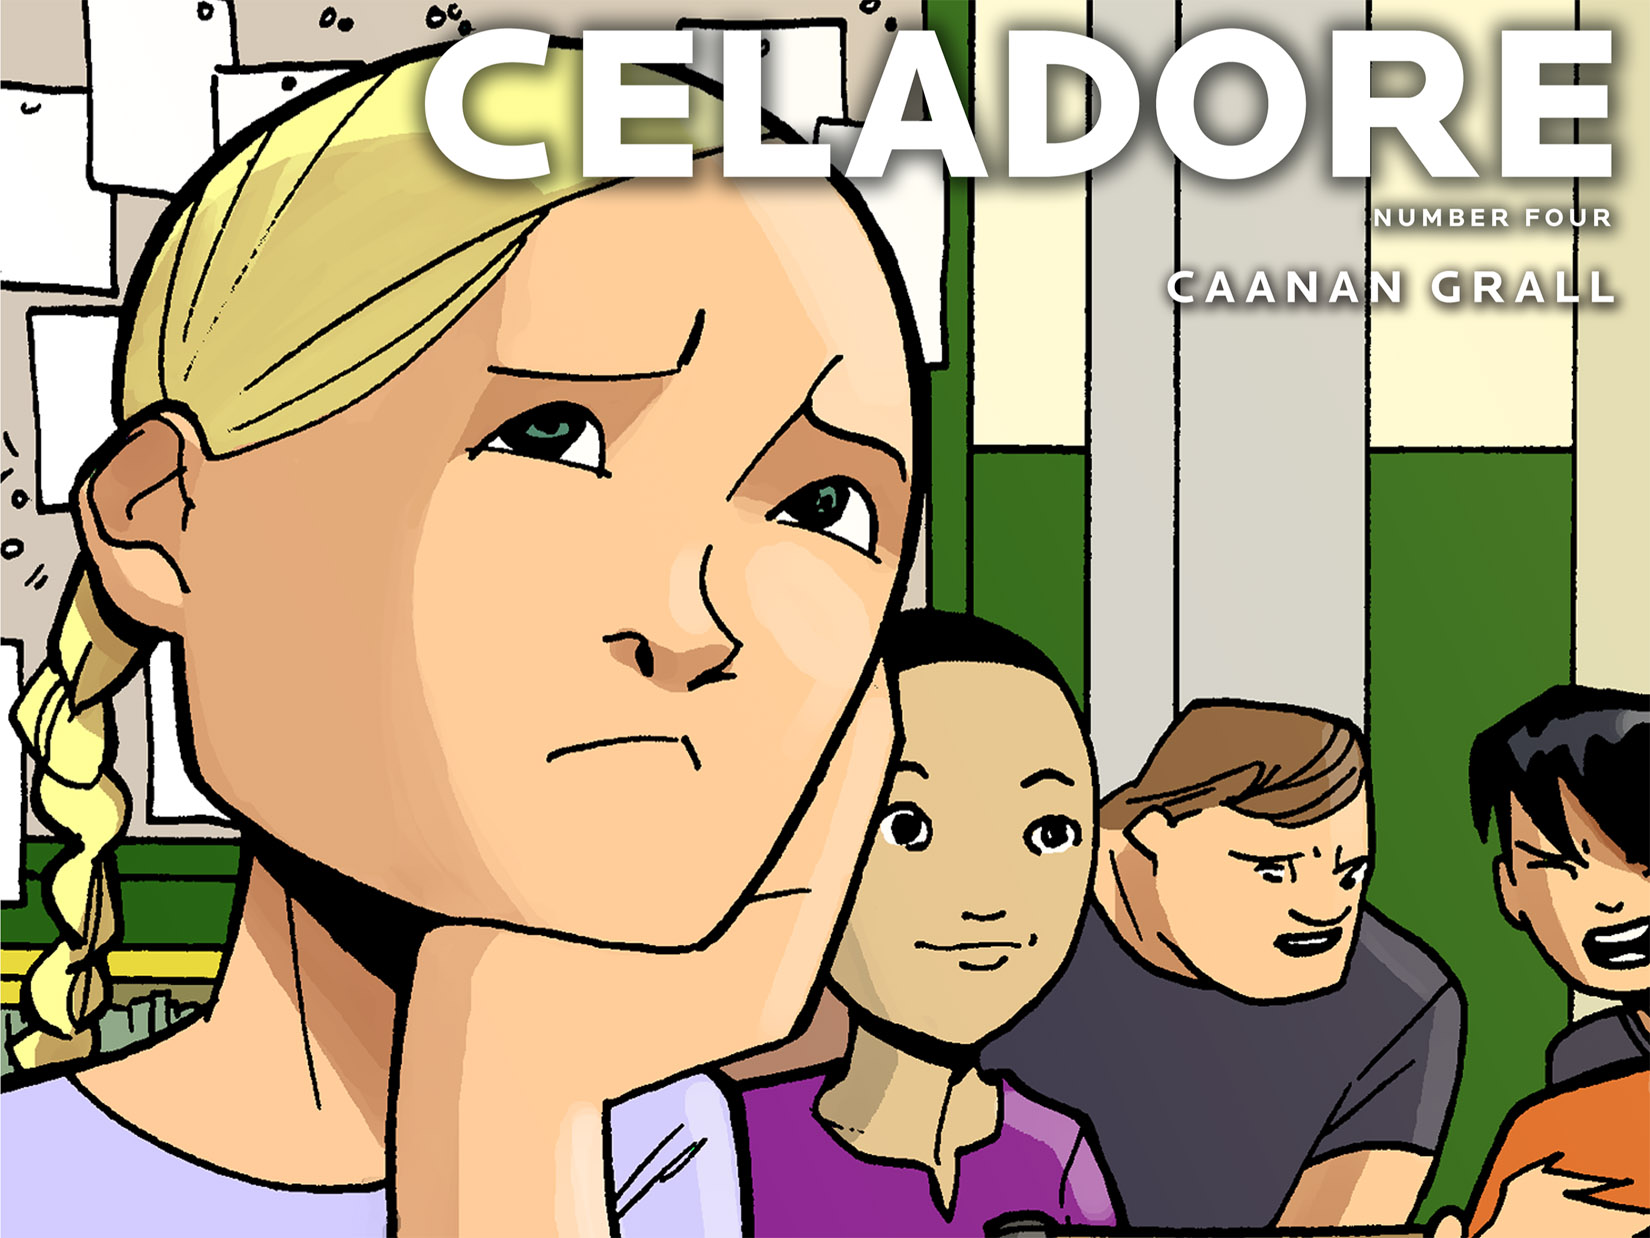 Read online Celadore comic -  Issue #4 - 1